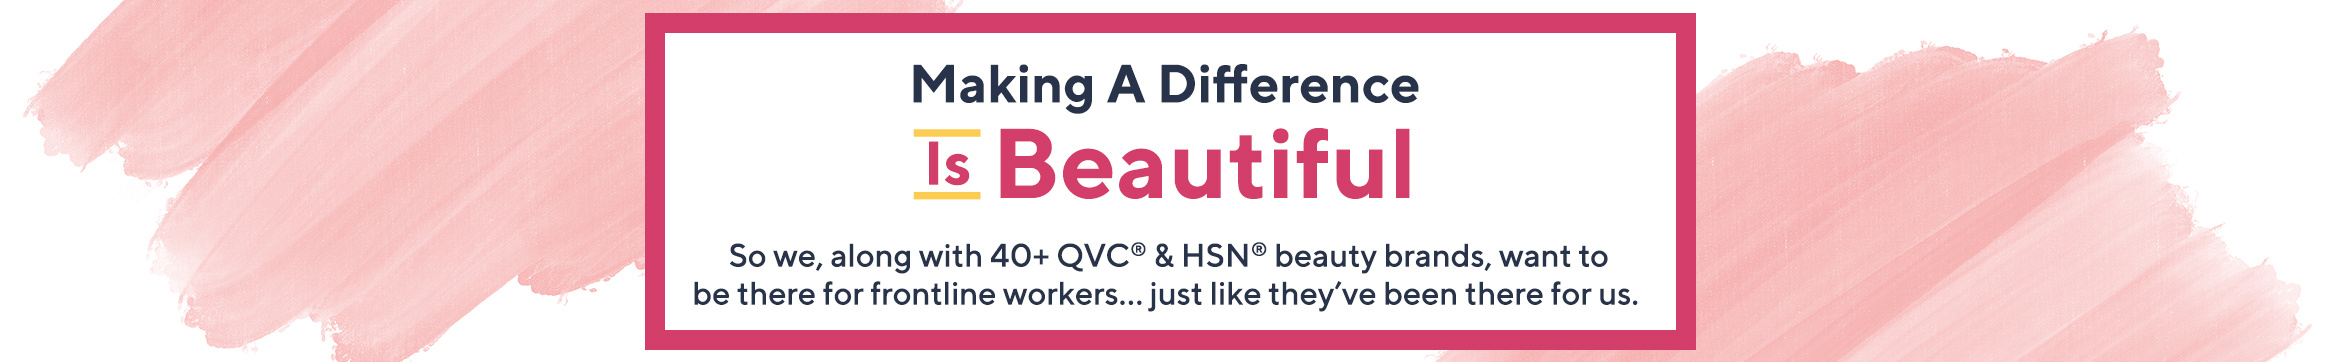 Making a Difference Is Beautiful   So we, along with 40+ QVC® & HSN® beauty brands, want to be there for frontline workers…just like they’ve been there for us. 